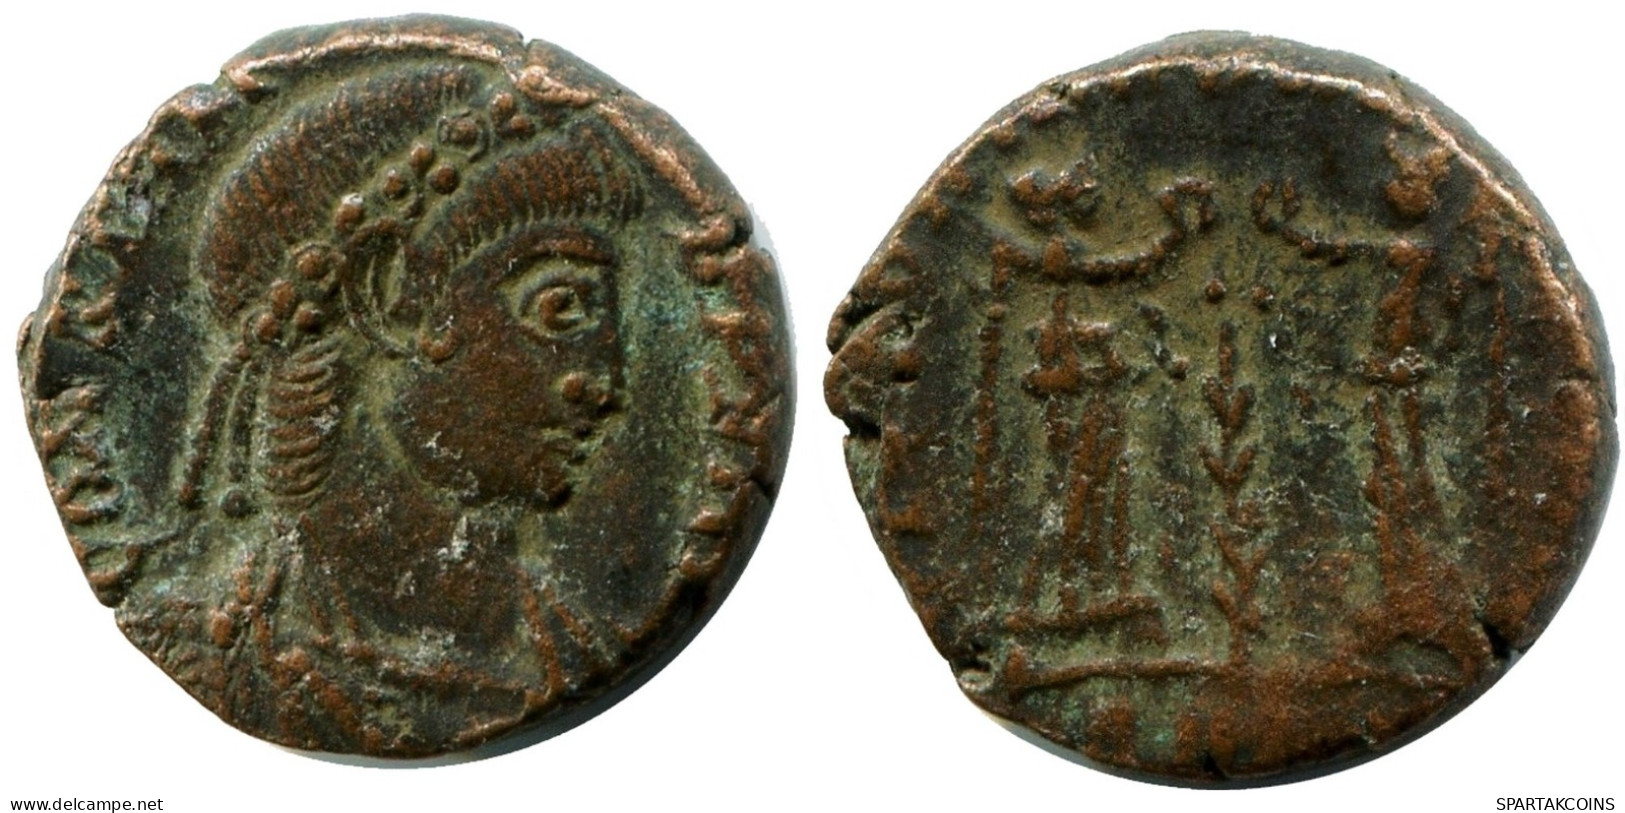 CONSTANS MINTED IN ROME ITALY FROM THE ROYAL ONTARIO MUSEUM #ANC11503.14.U.A - The Christian Empire (307 AD Tot 363 AD)